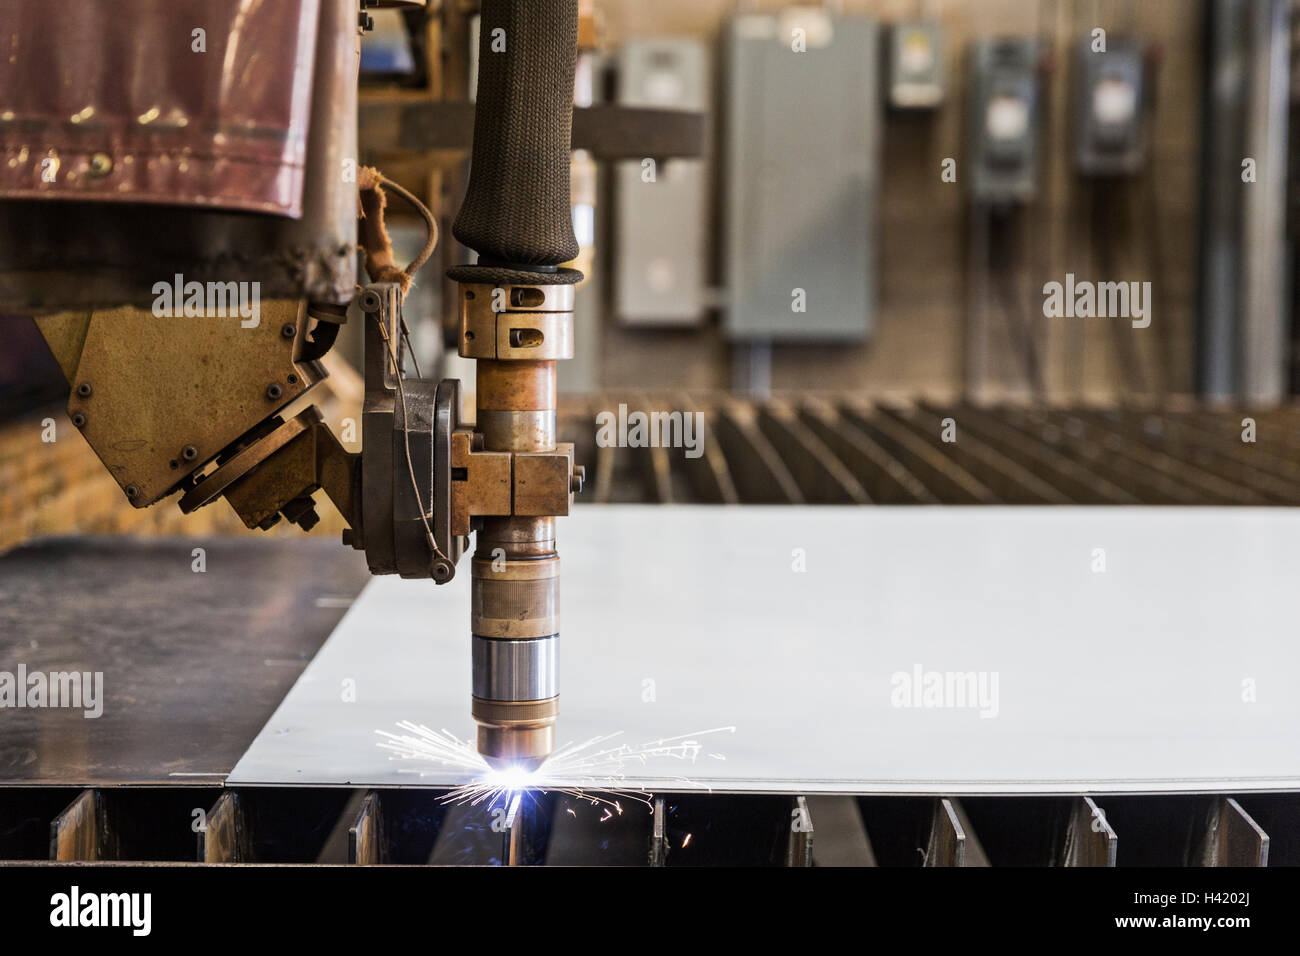 Sparking cutting tool in metal fabrication factory Stock Photo